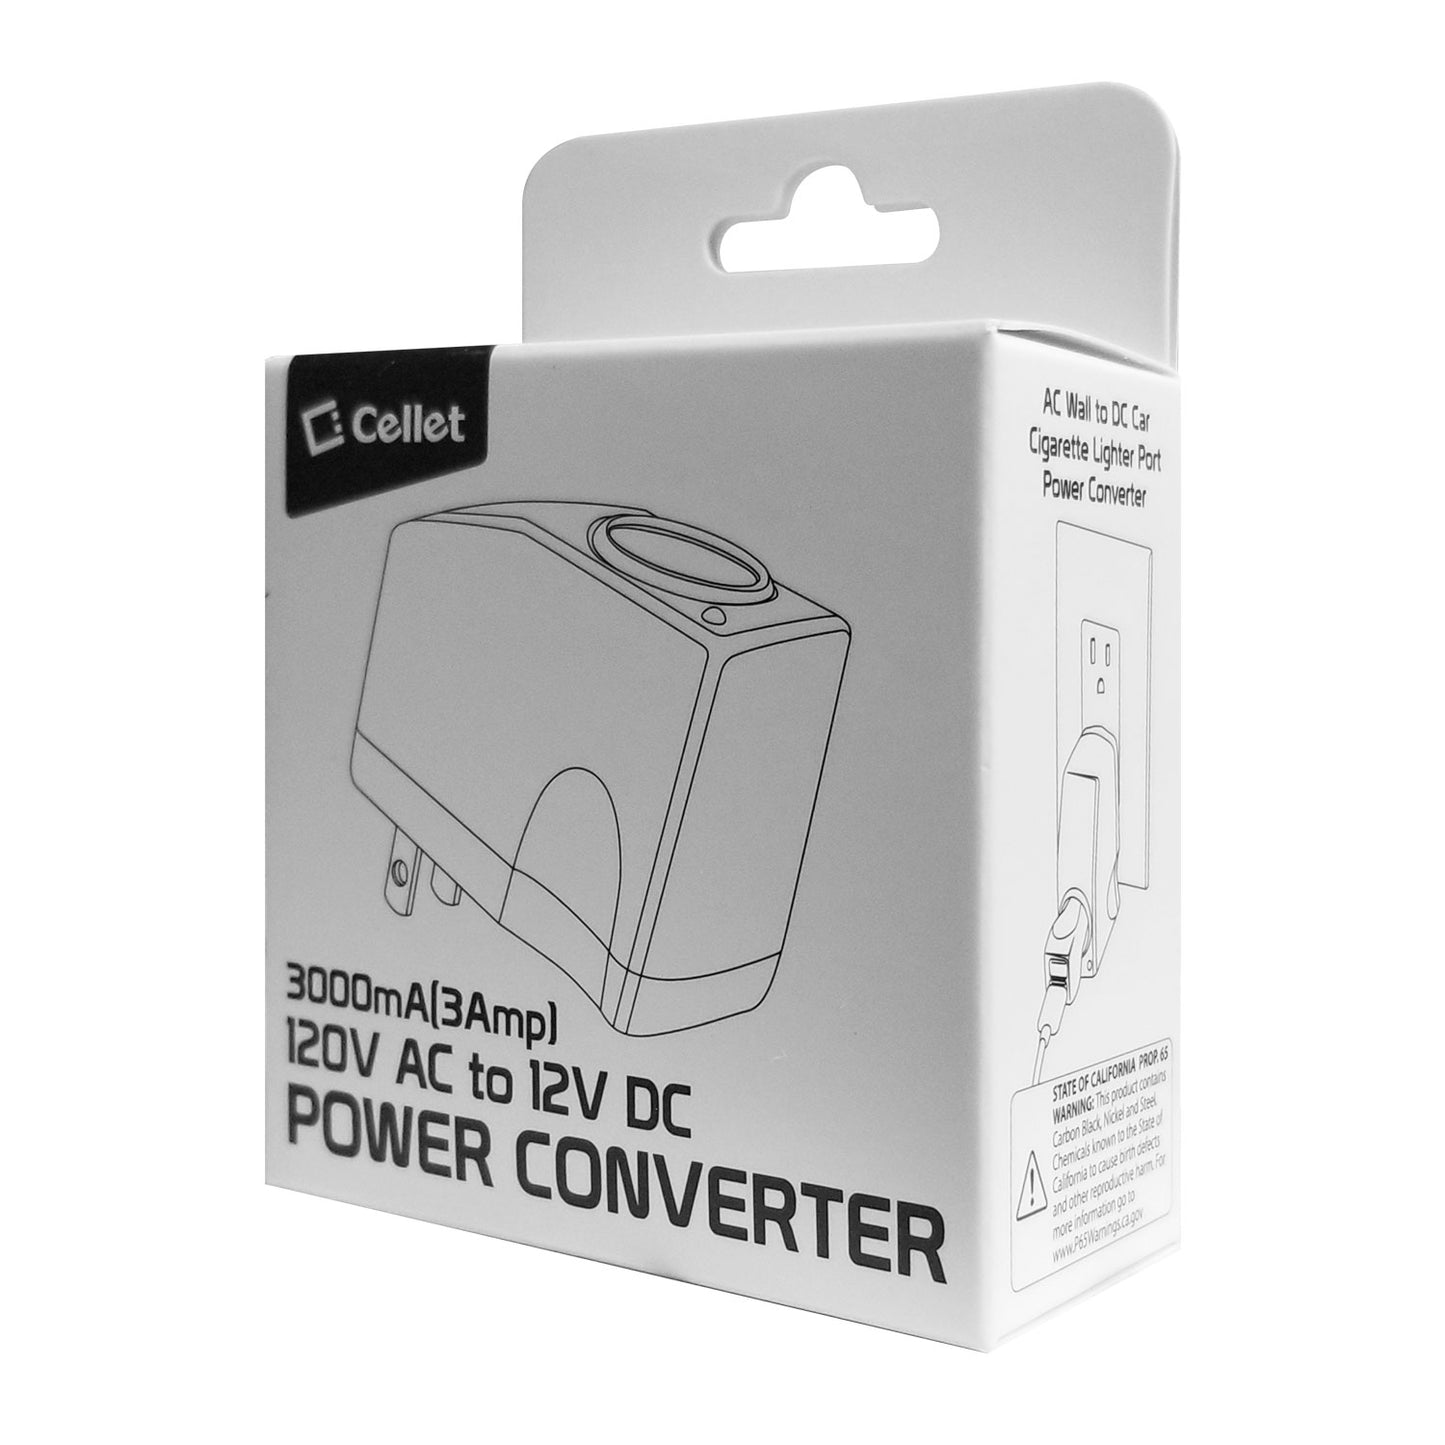 FM3000 - Compact Power Converter, 120V AC to 12 V DC (3000mA) Power Converter by Cellet